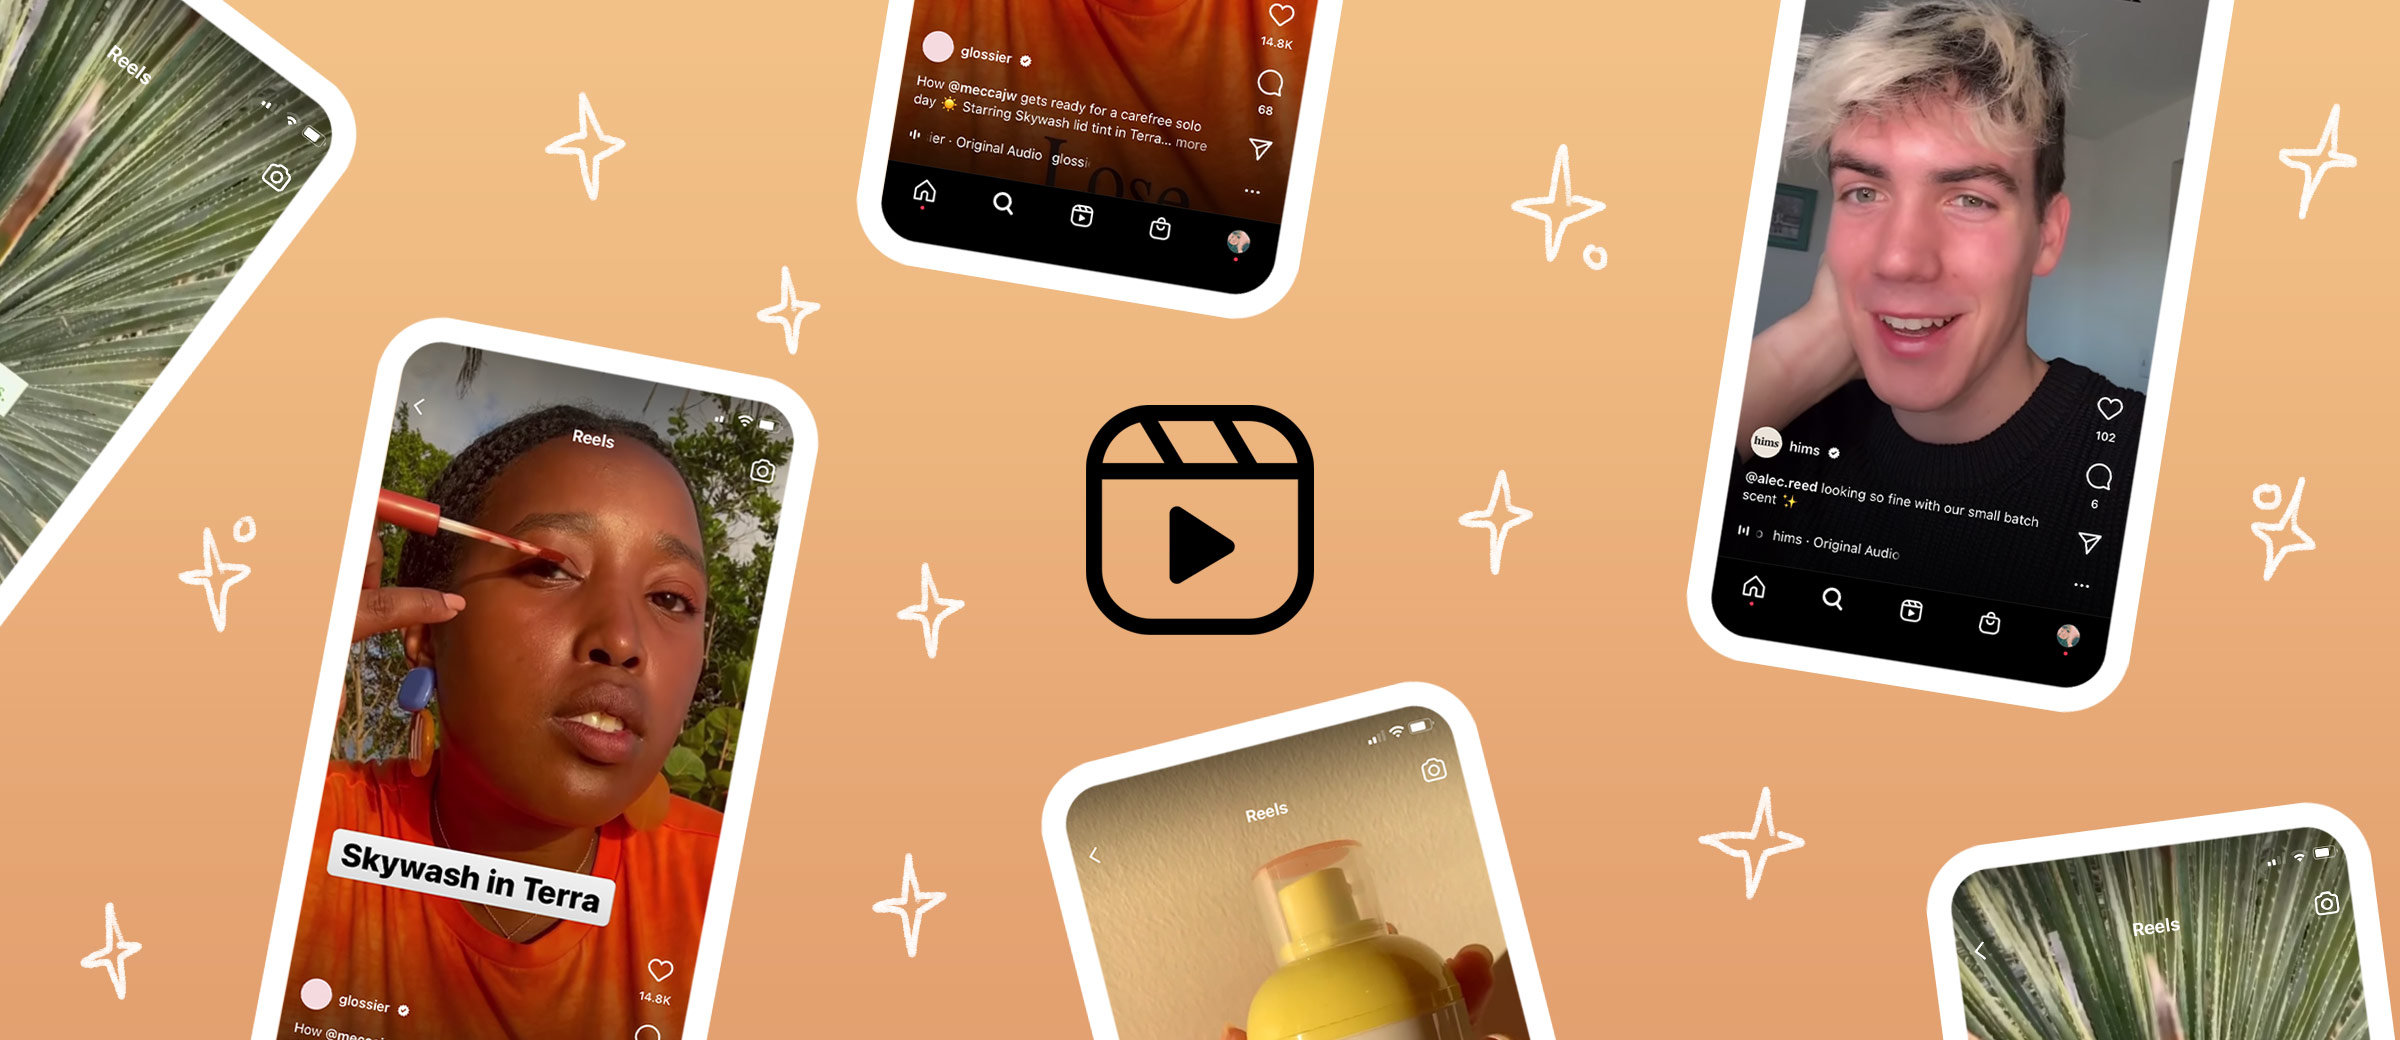 Instagram Reels: Tips & Tricks to Making Engaging Content